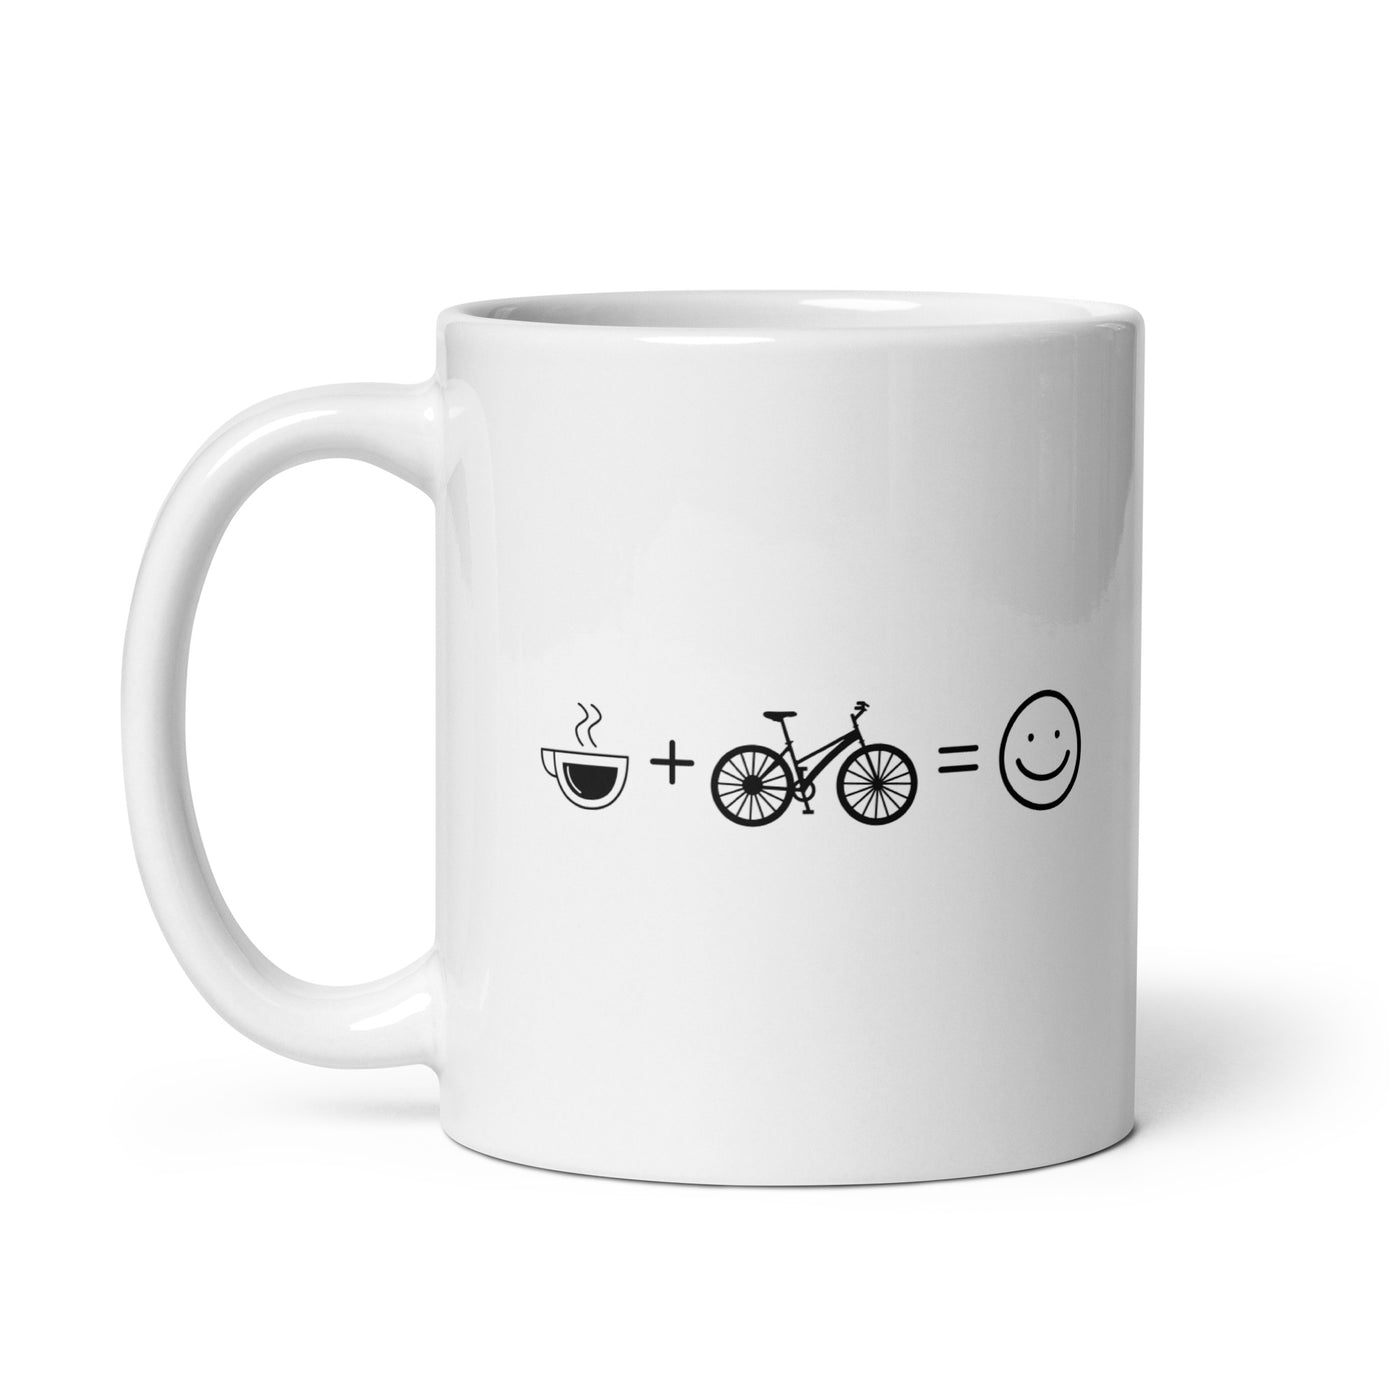 Coffee Smile Face And Cycling - Tasse fahrrad 11oz